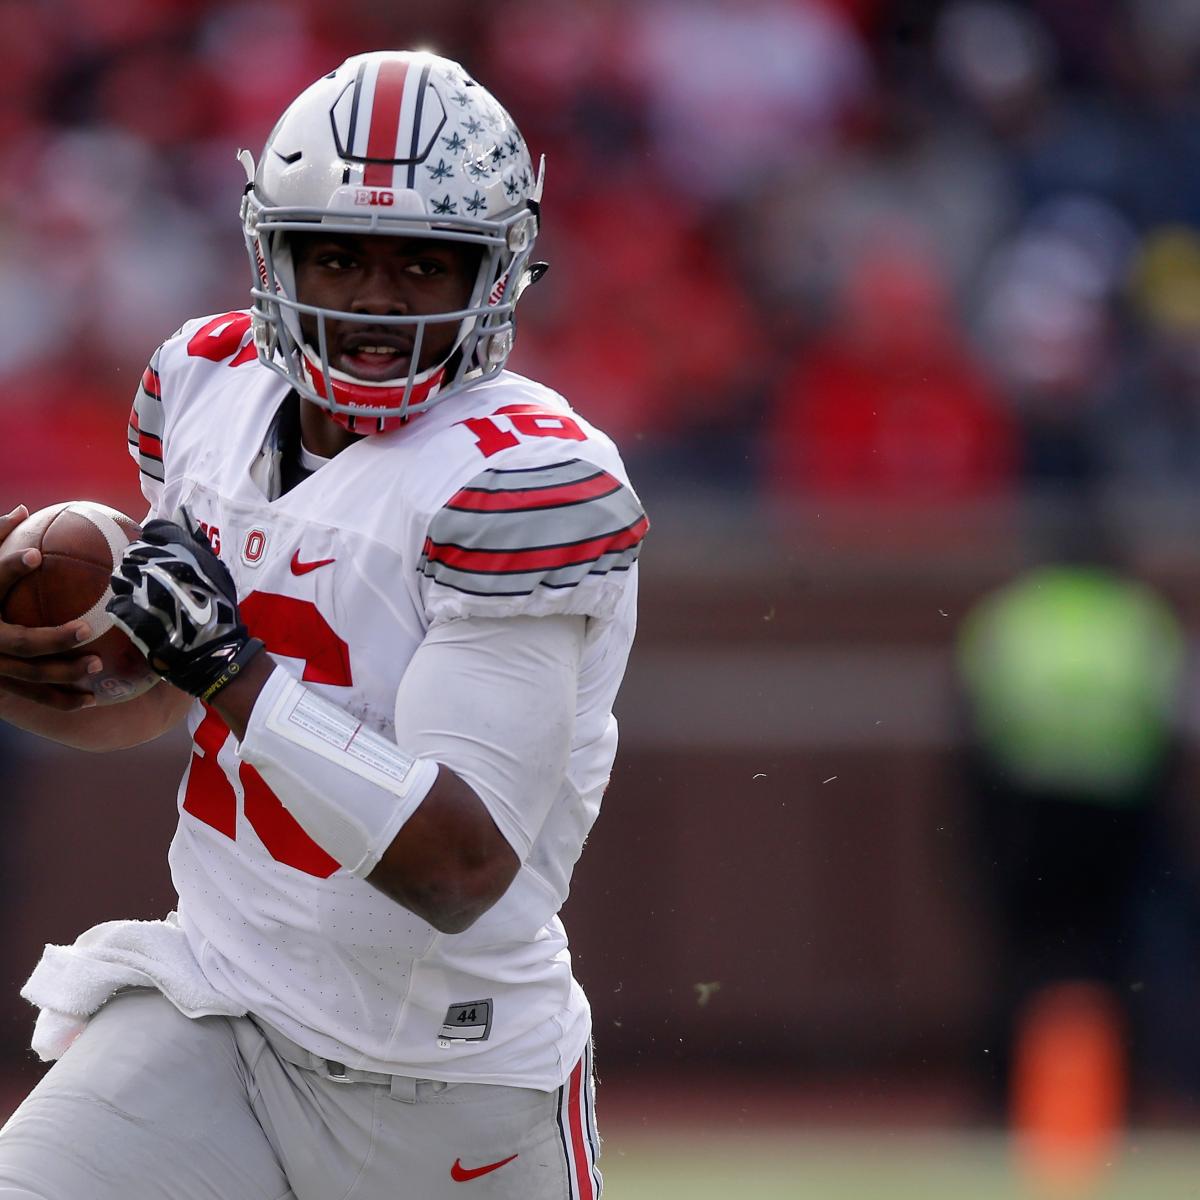 Ohio State Football 5 Bold Predictions for the Buckeyes' Bowl Game